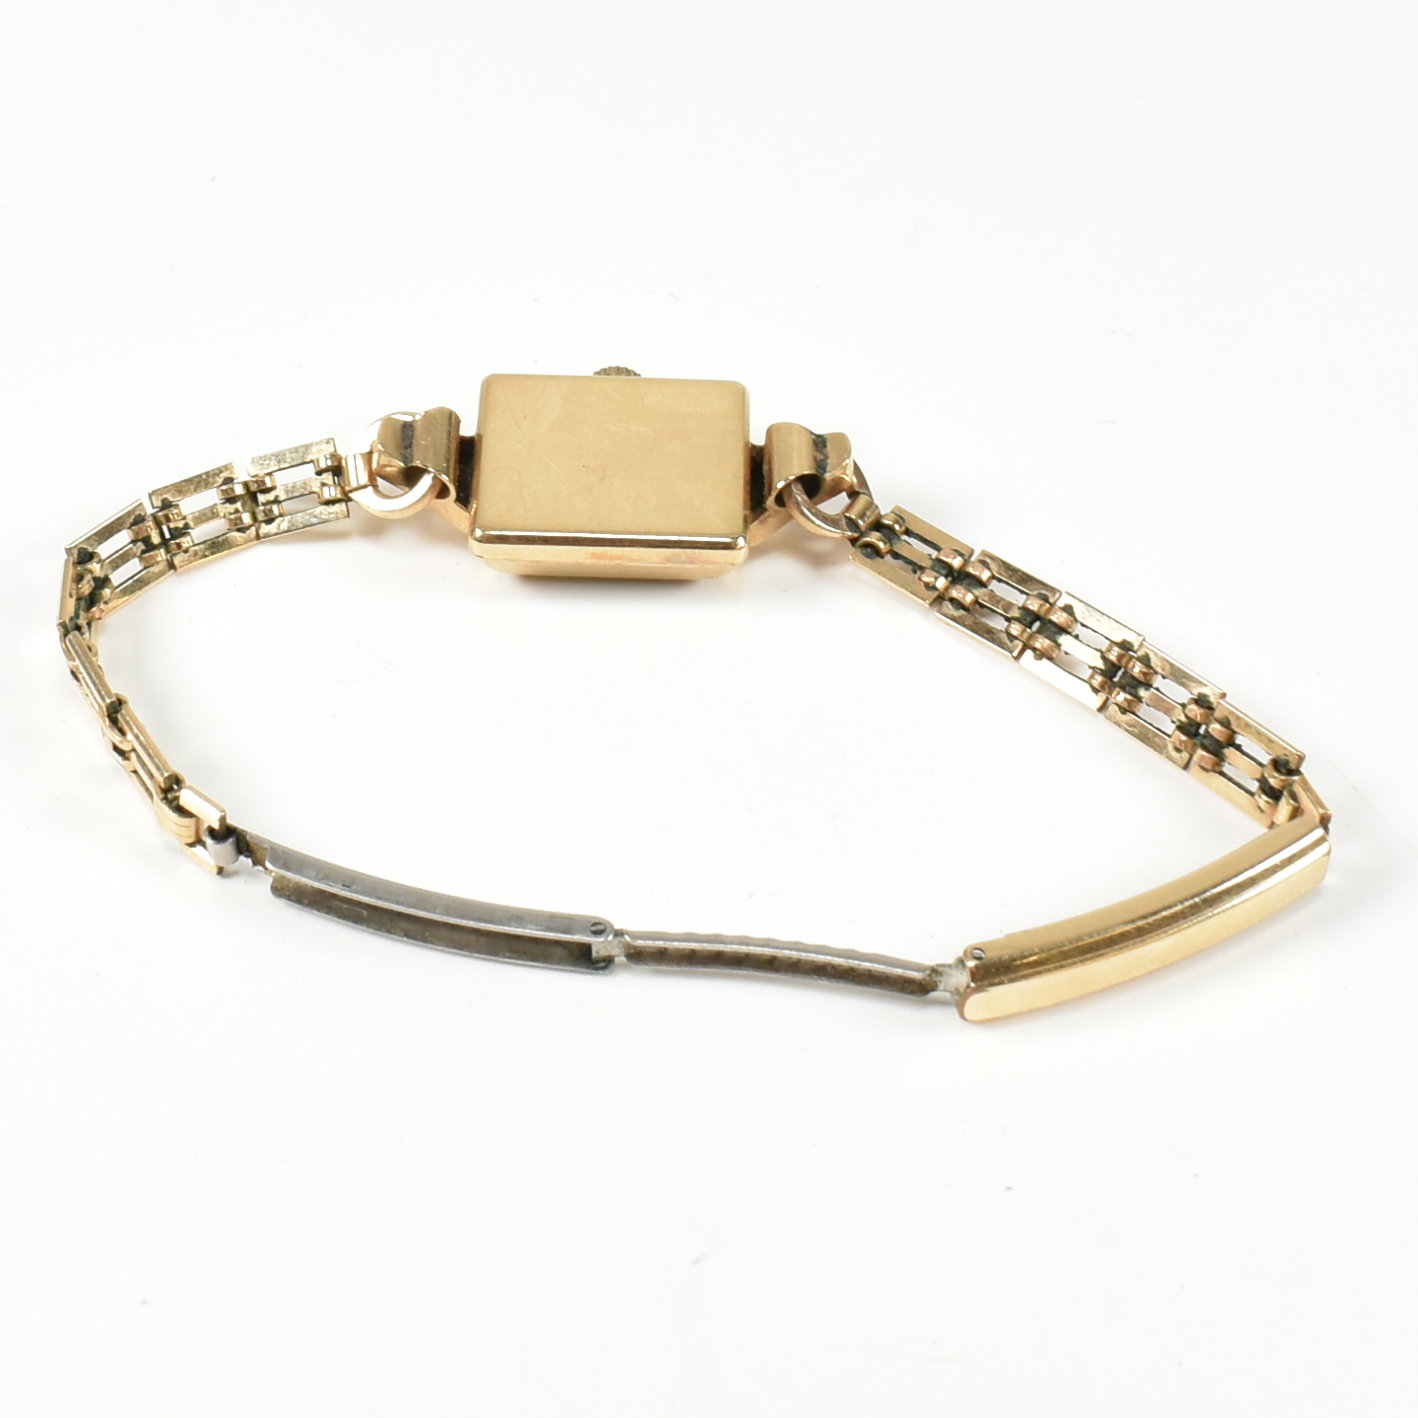 HALLMARKED 9CT GOLD AUDAX LADIES DRESS WATCH WITH ROLLED GOLD BRACELET - Image 4 of 7